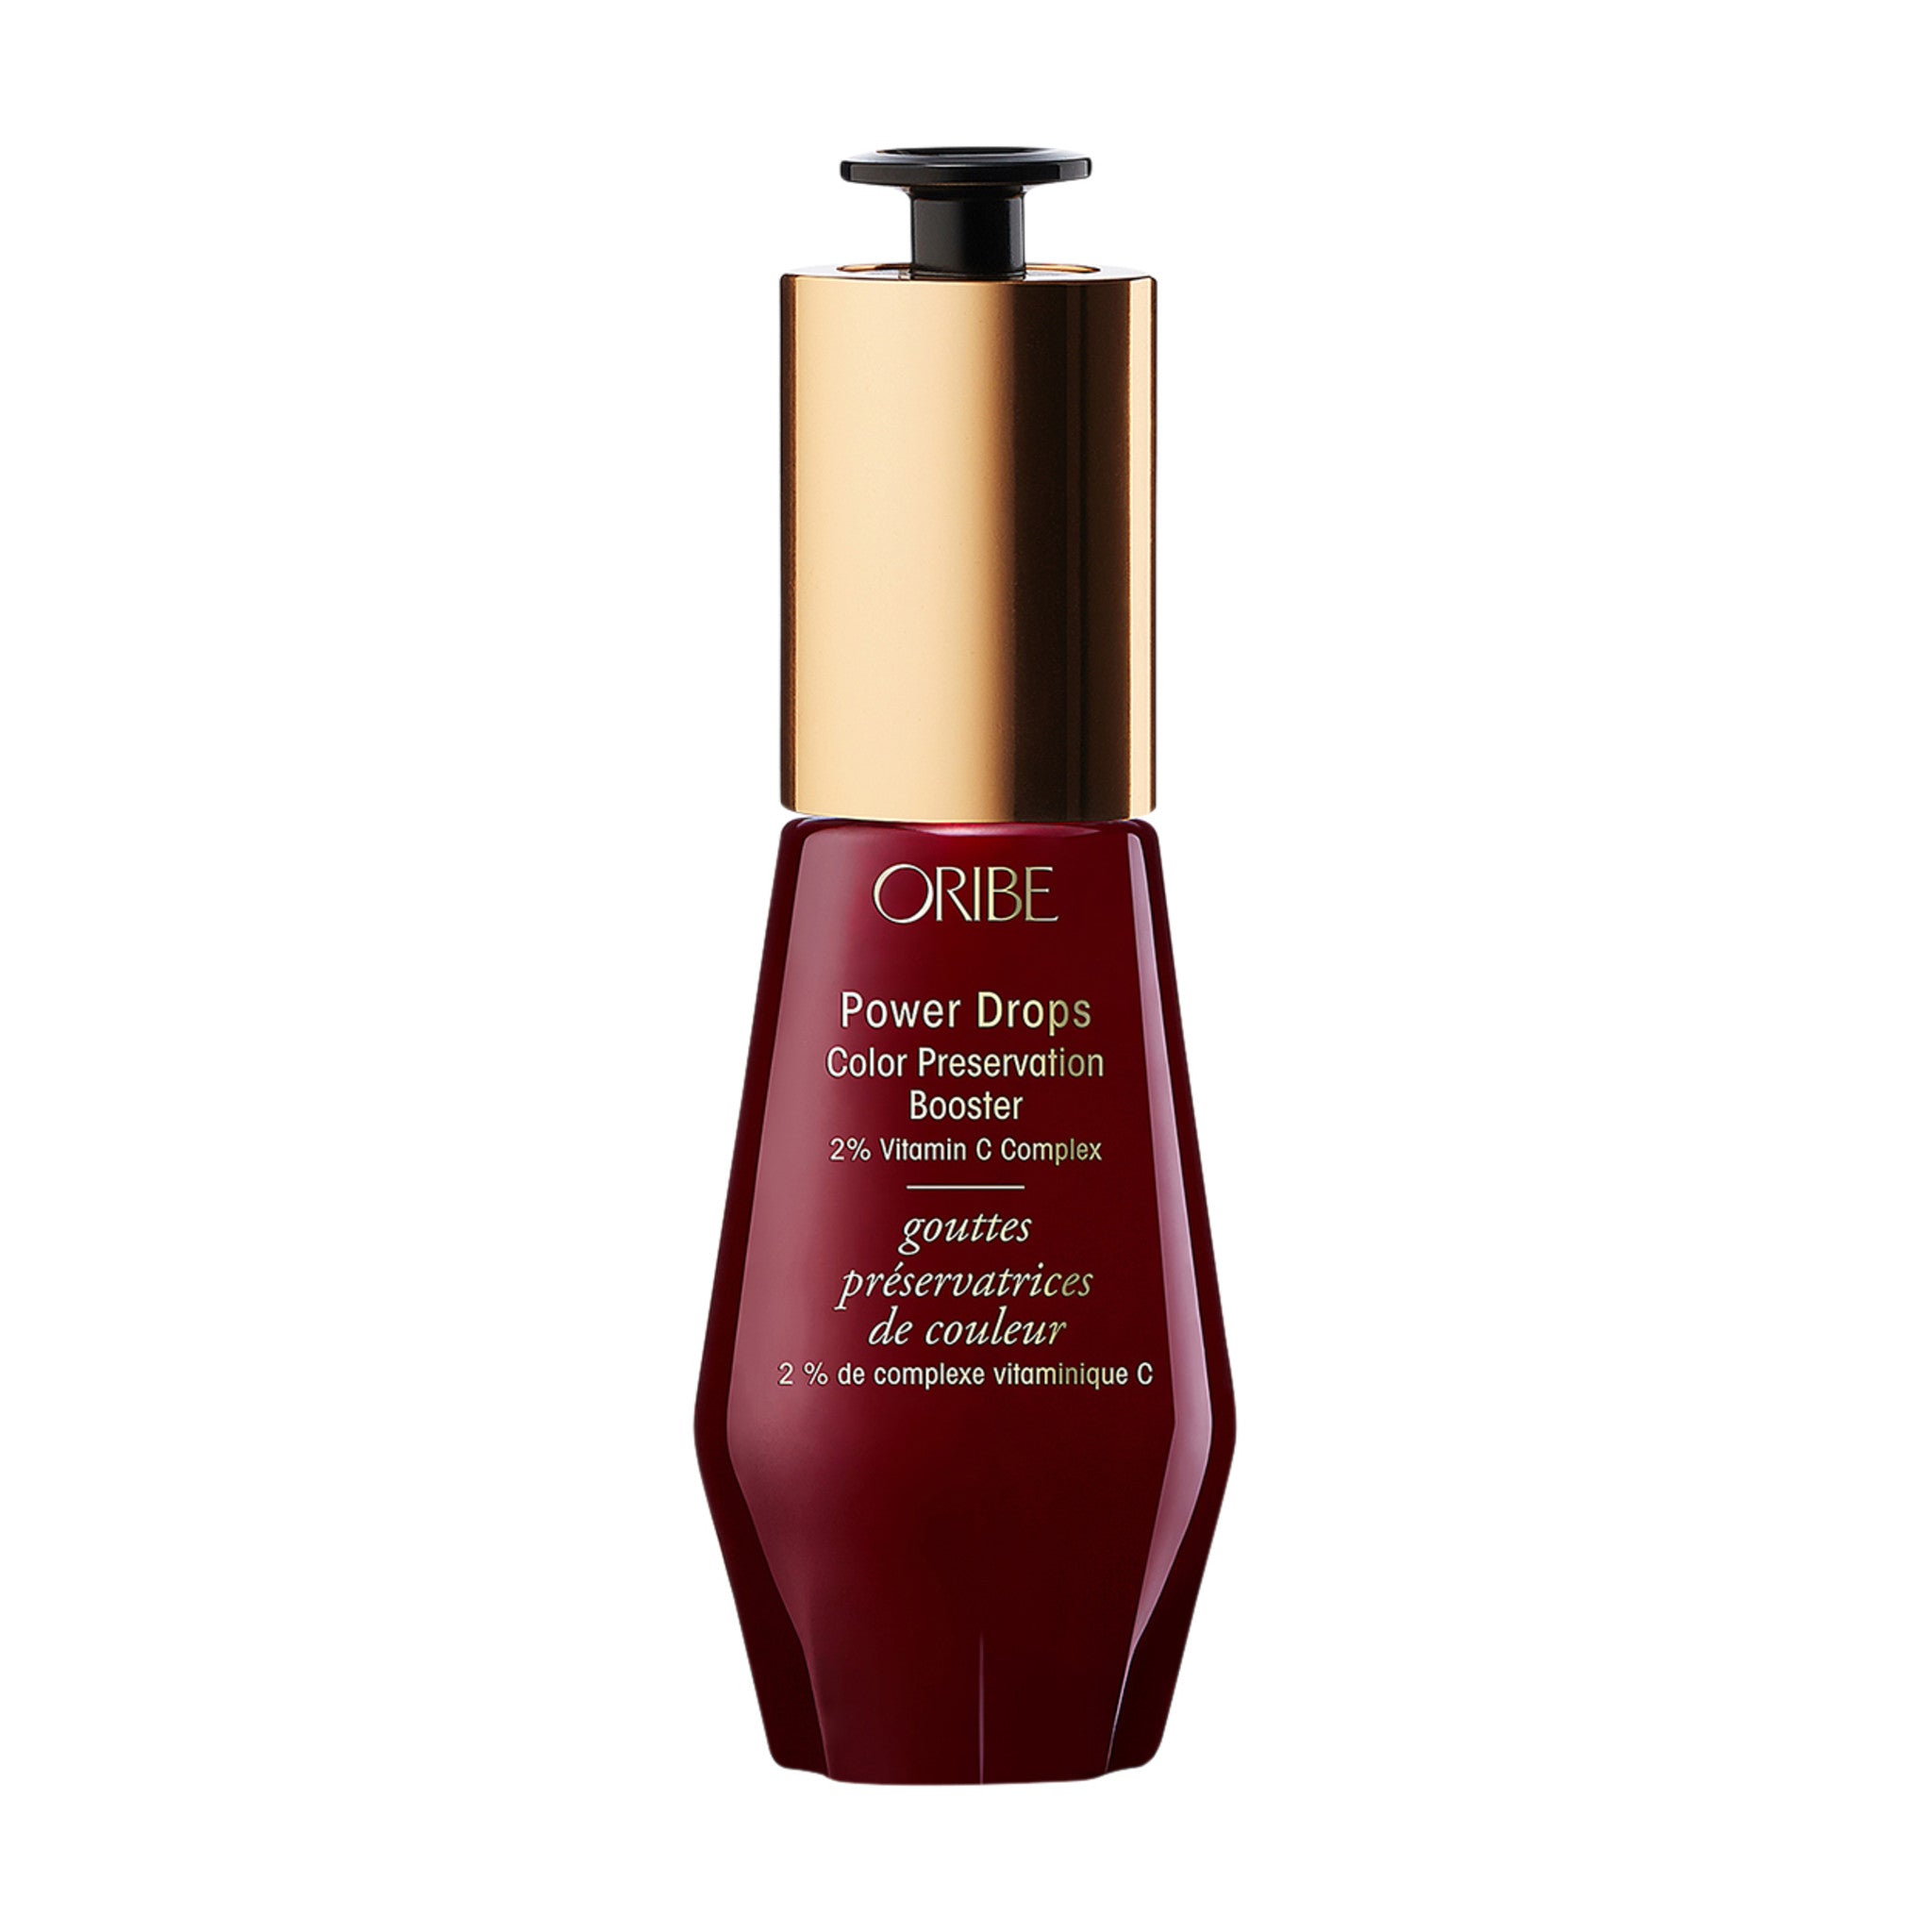 Oribe Power Drops: Color Preservation Booster main image.